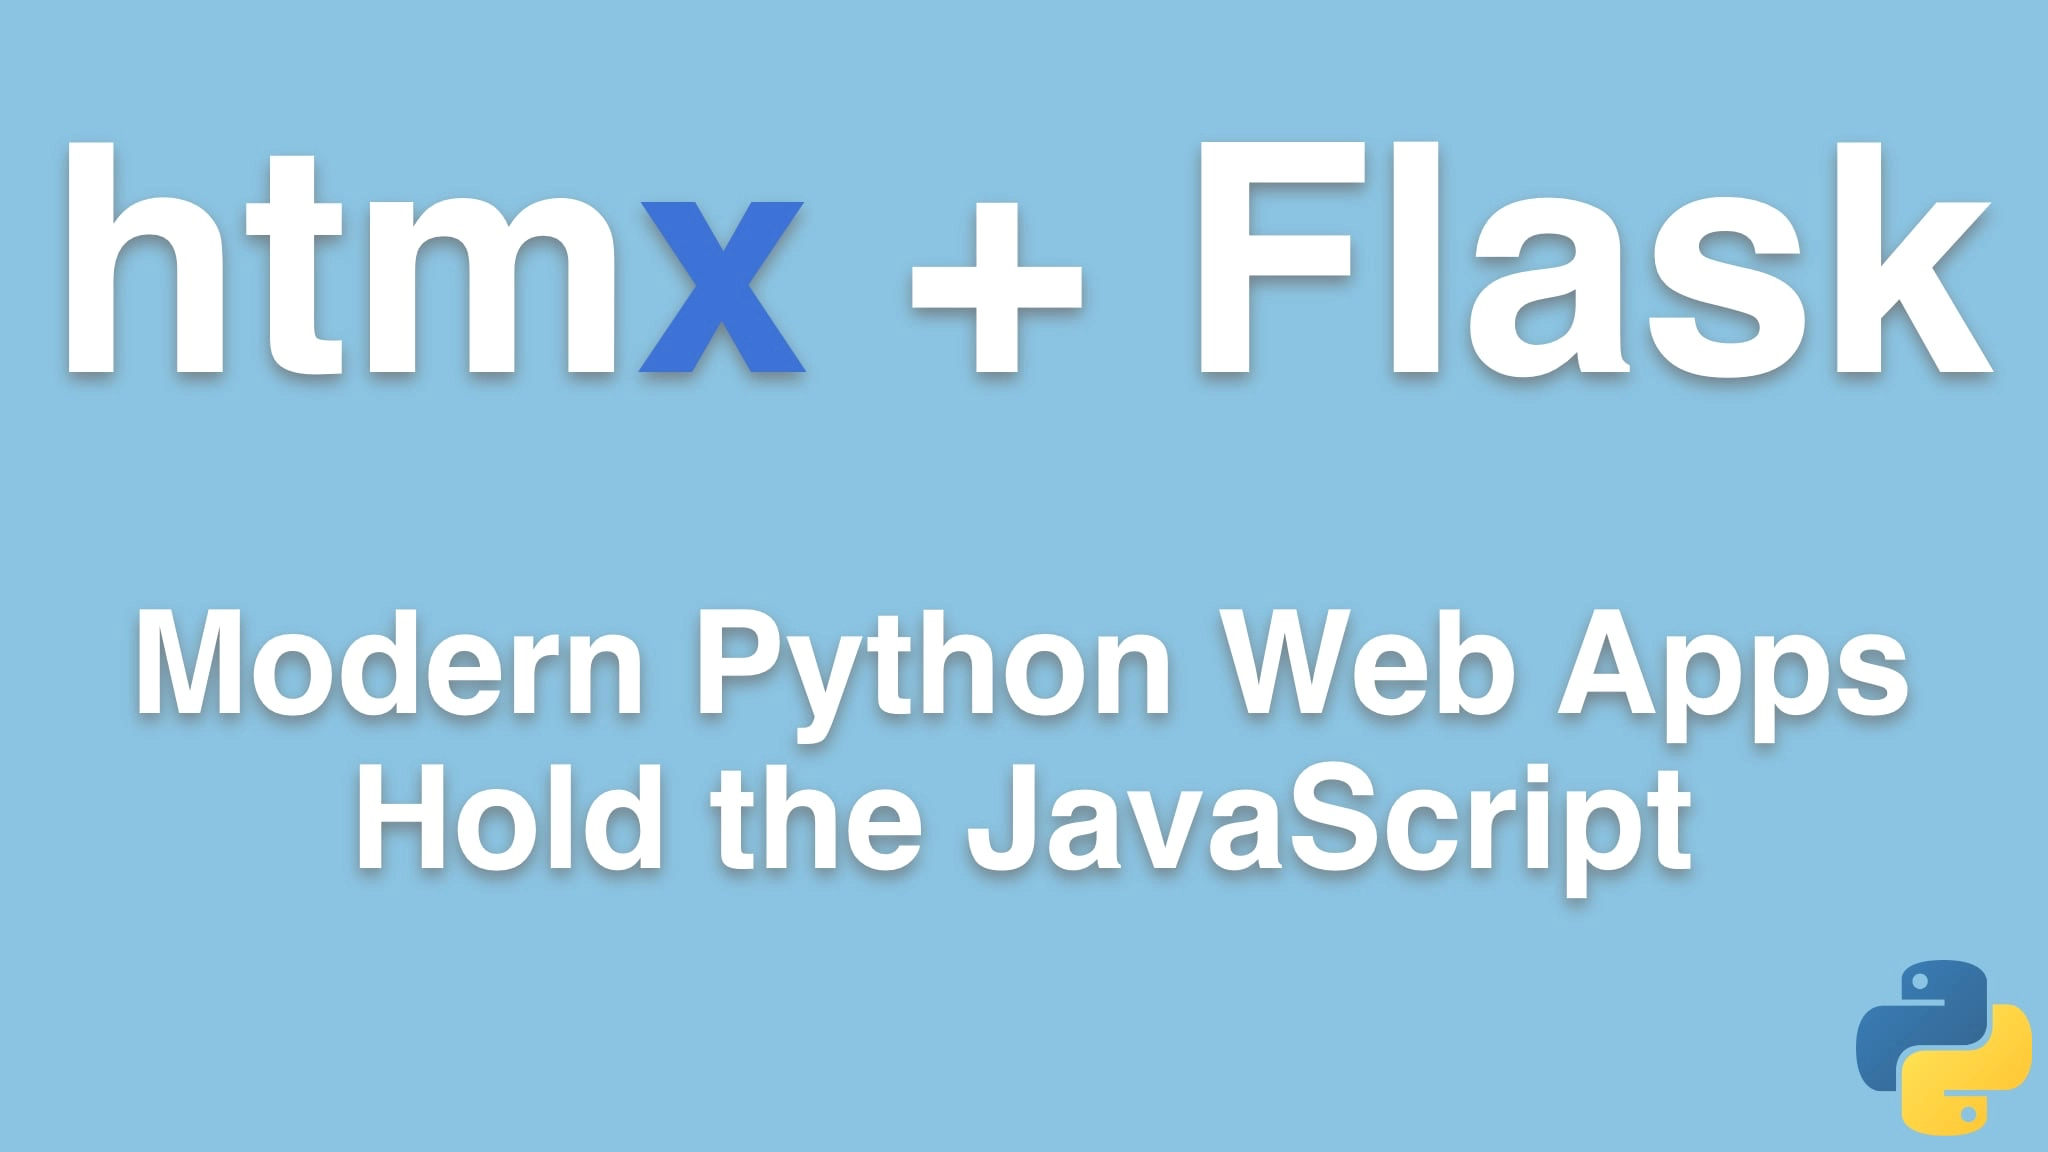 Course: HTMX + Flask: Modern Python Web Apps, Hold the JavaScript